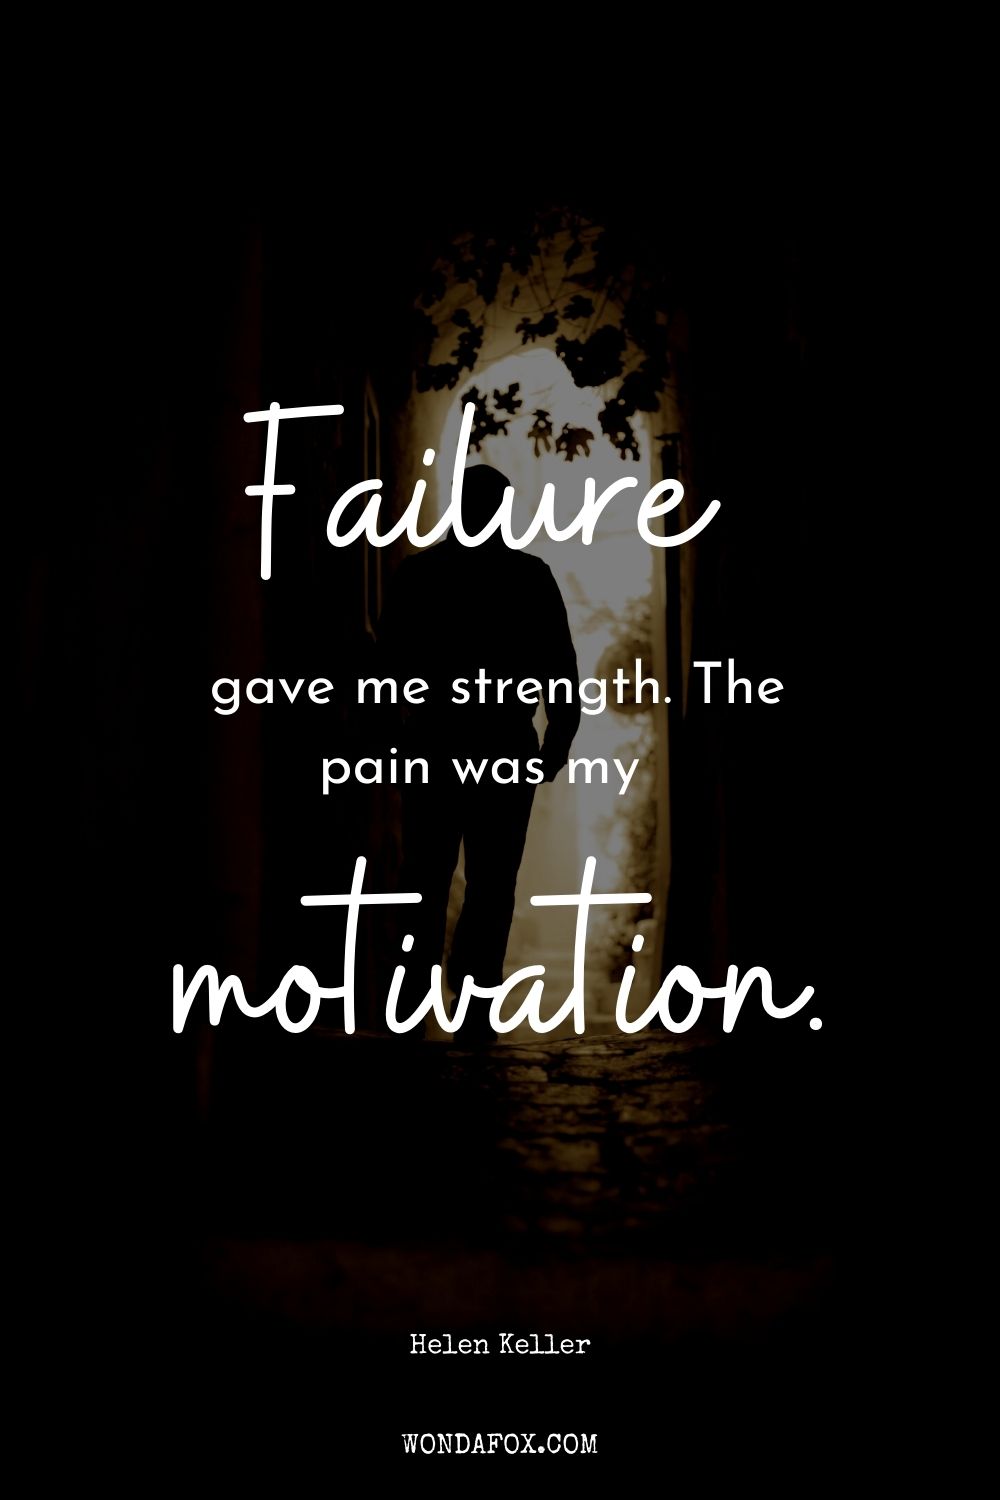 Failure gave me strength. The pain was my motivation.